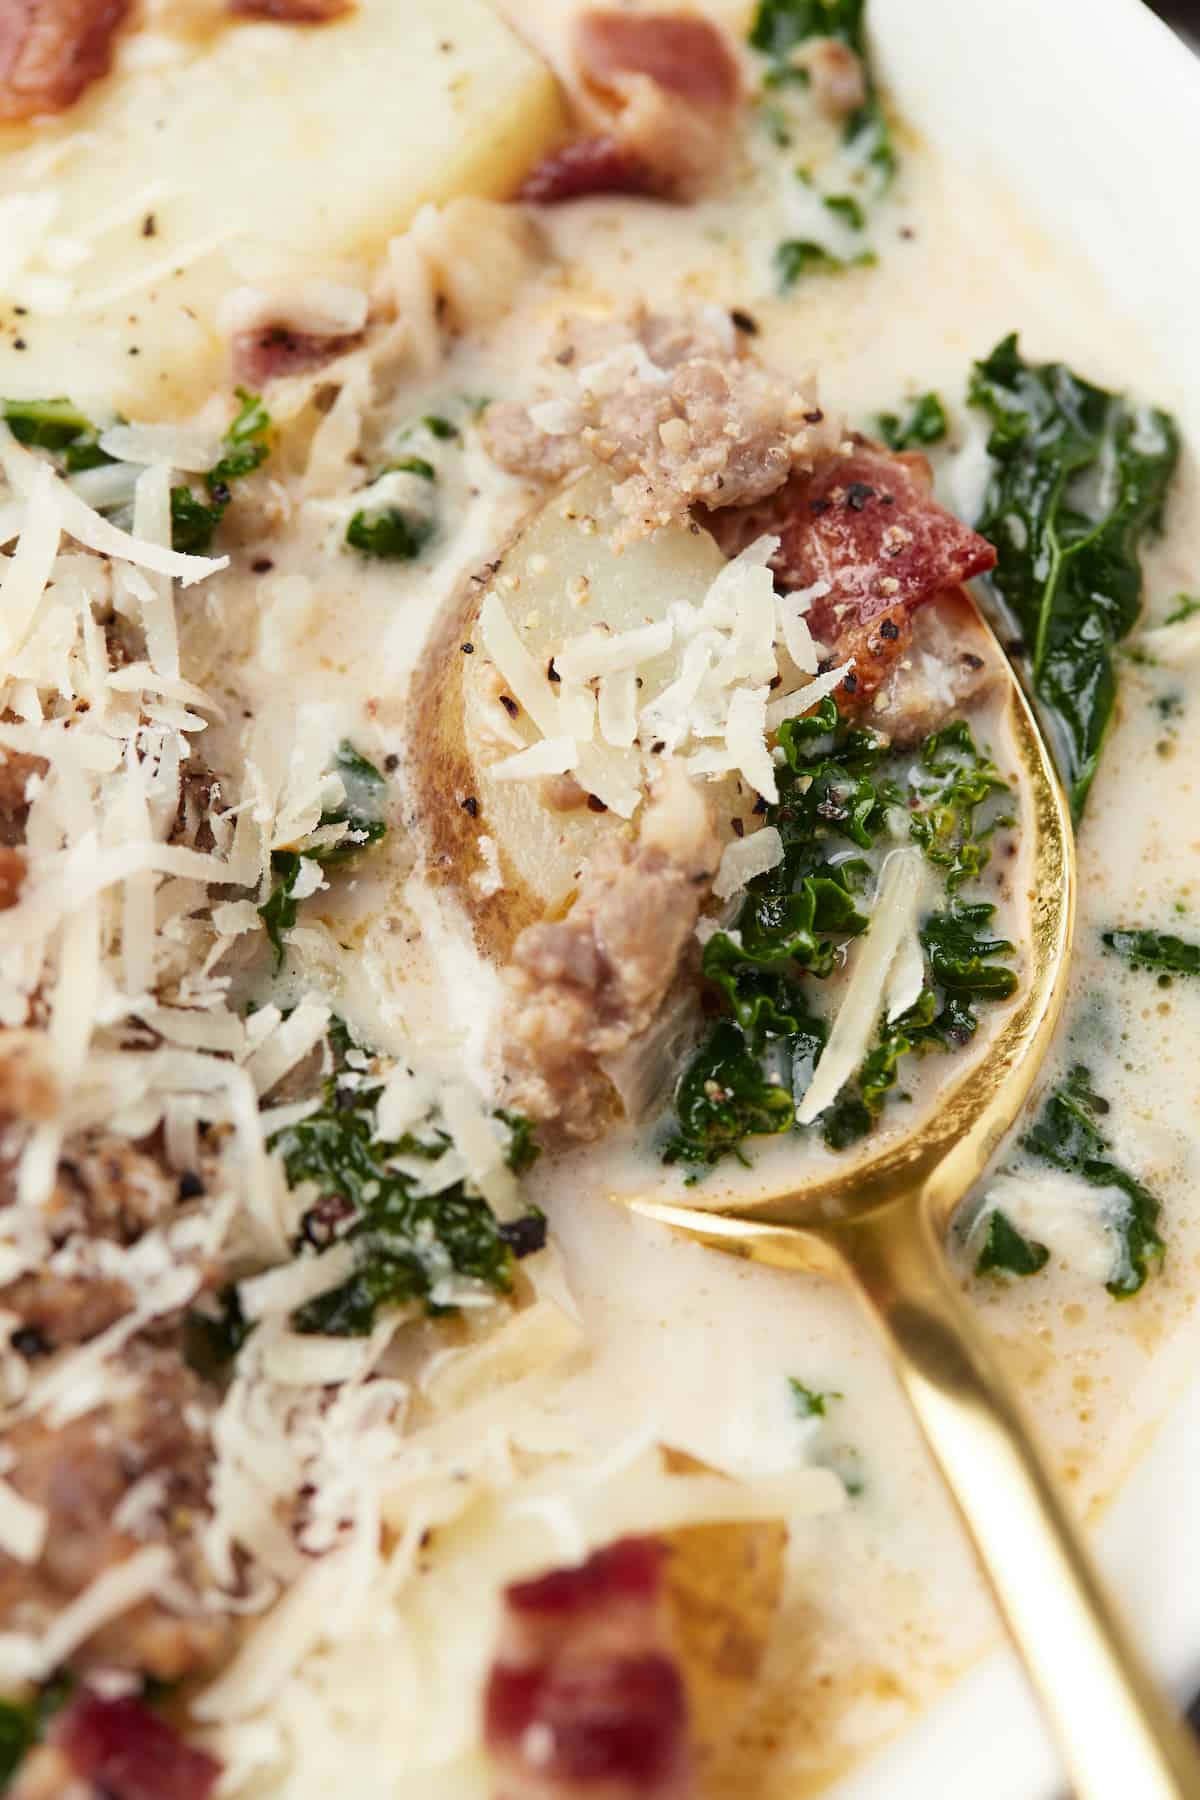 A close-up shot of a spoon scooping up a mouthful of Zuppa Toscana